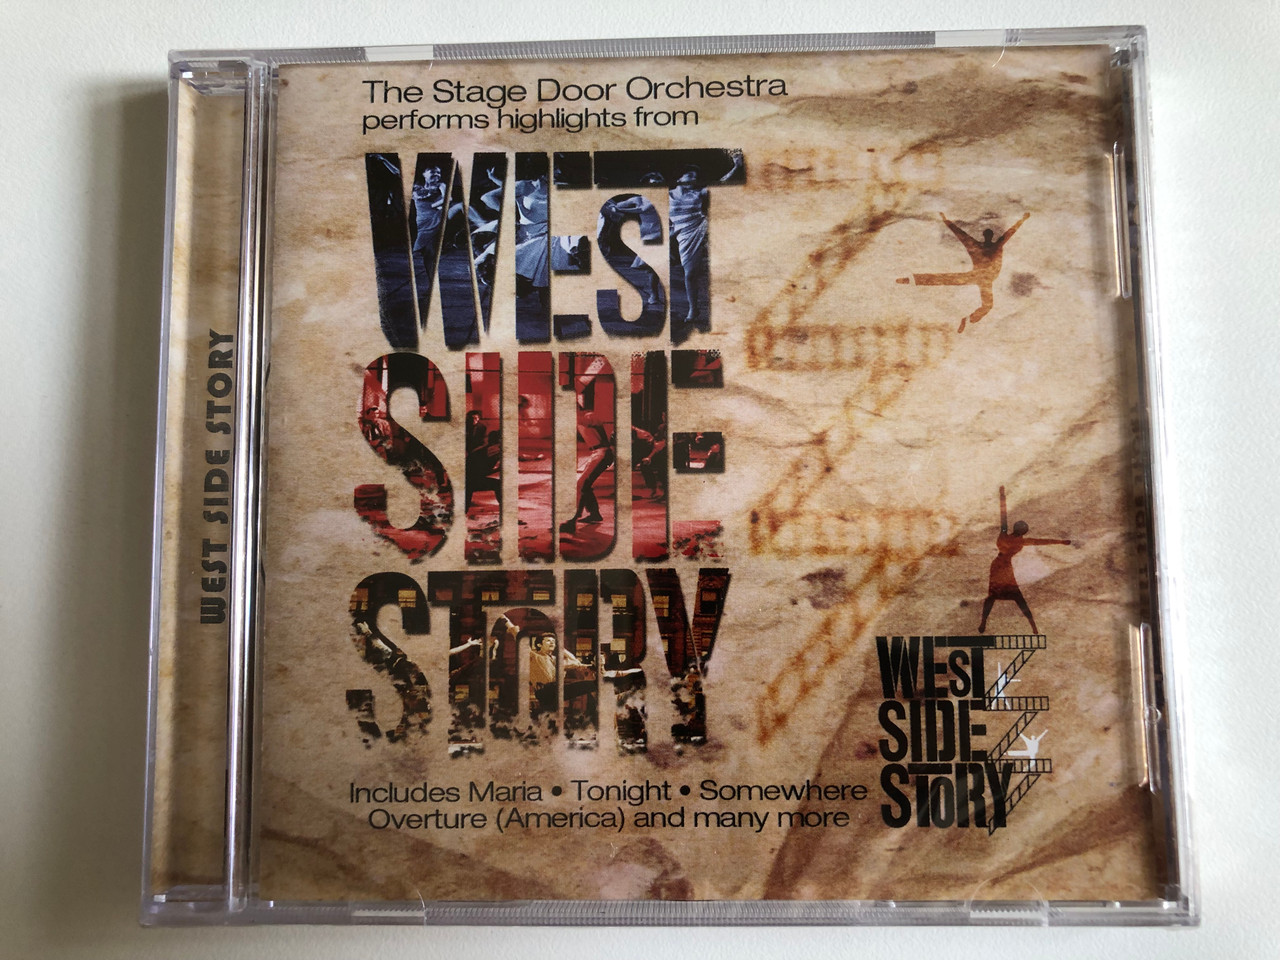 https://cdn10.bigcommerce.com/s-62bdpkt7pb/products/0/images/292763/The_Stage_Door_Orchestra_Performs_highlights_from_West_Side_Story_-_Includes_Maria_Tonight_Somewhere_Overture_America_and_many_more_Cedar_Audio_CD_GFS218_1__50165.1691766943.1280.1280.JPG?c=2&_gl=1*1rp9es*_ga*MjA2NTIxMjE2MC4xNTkwNTEyNTMy*_ga_WS2VZYPC6G*MTY5MTc2NTI1MS4xMDE4LjEuMTY5MTc2NjY0Ni4zOS4wLjA.